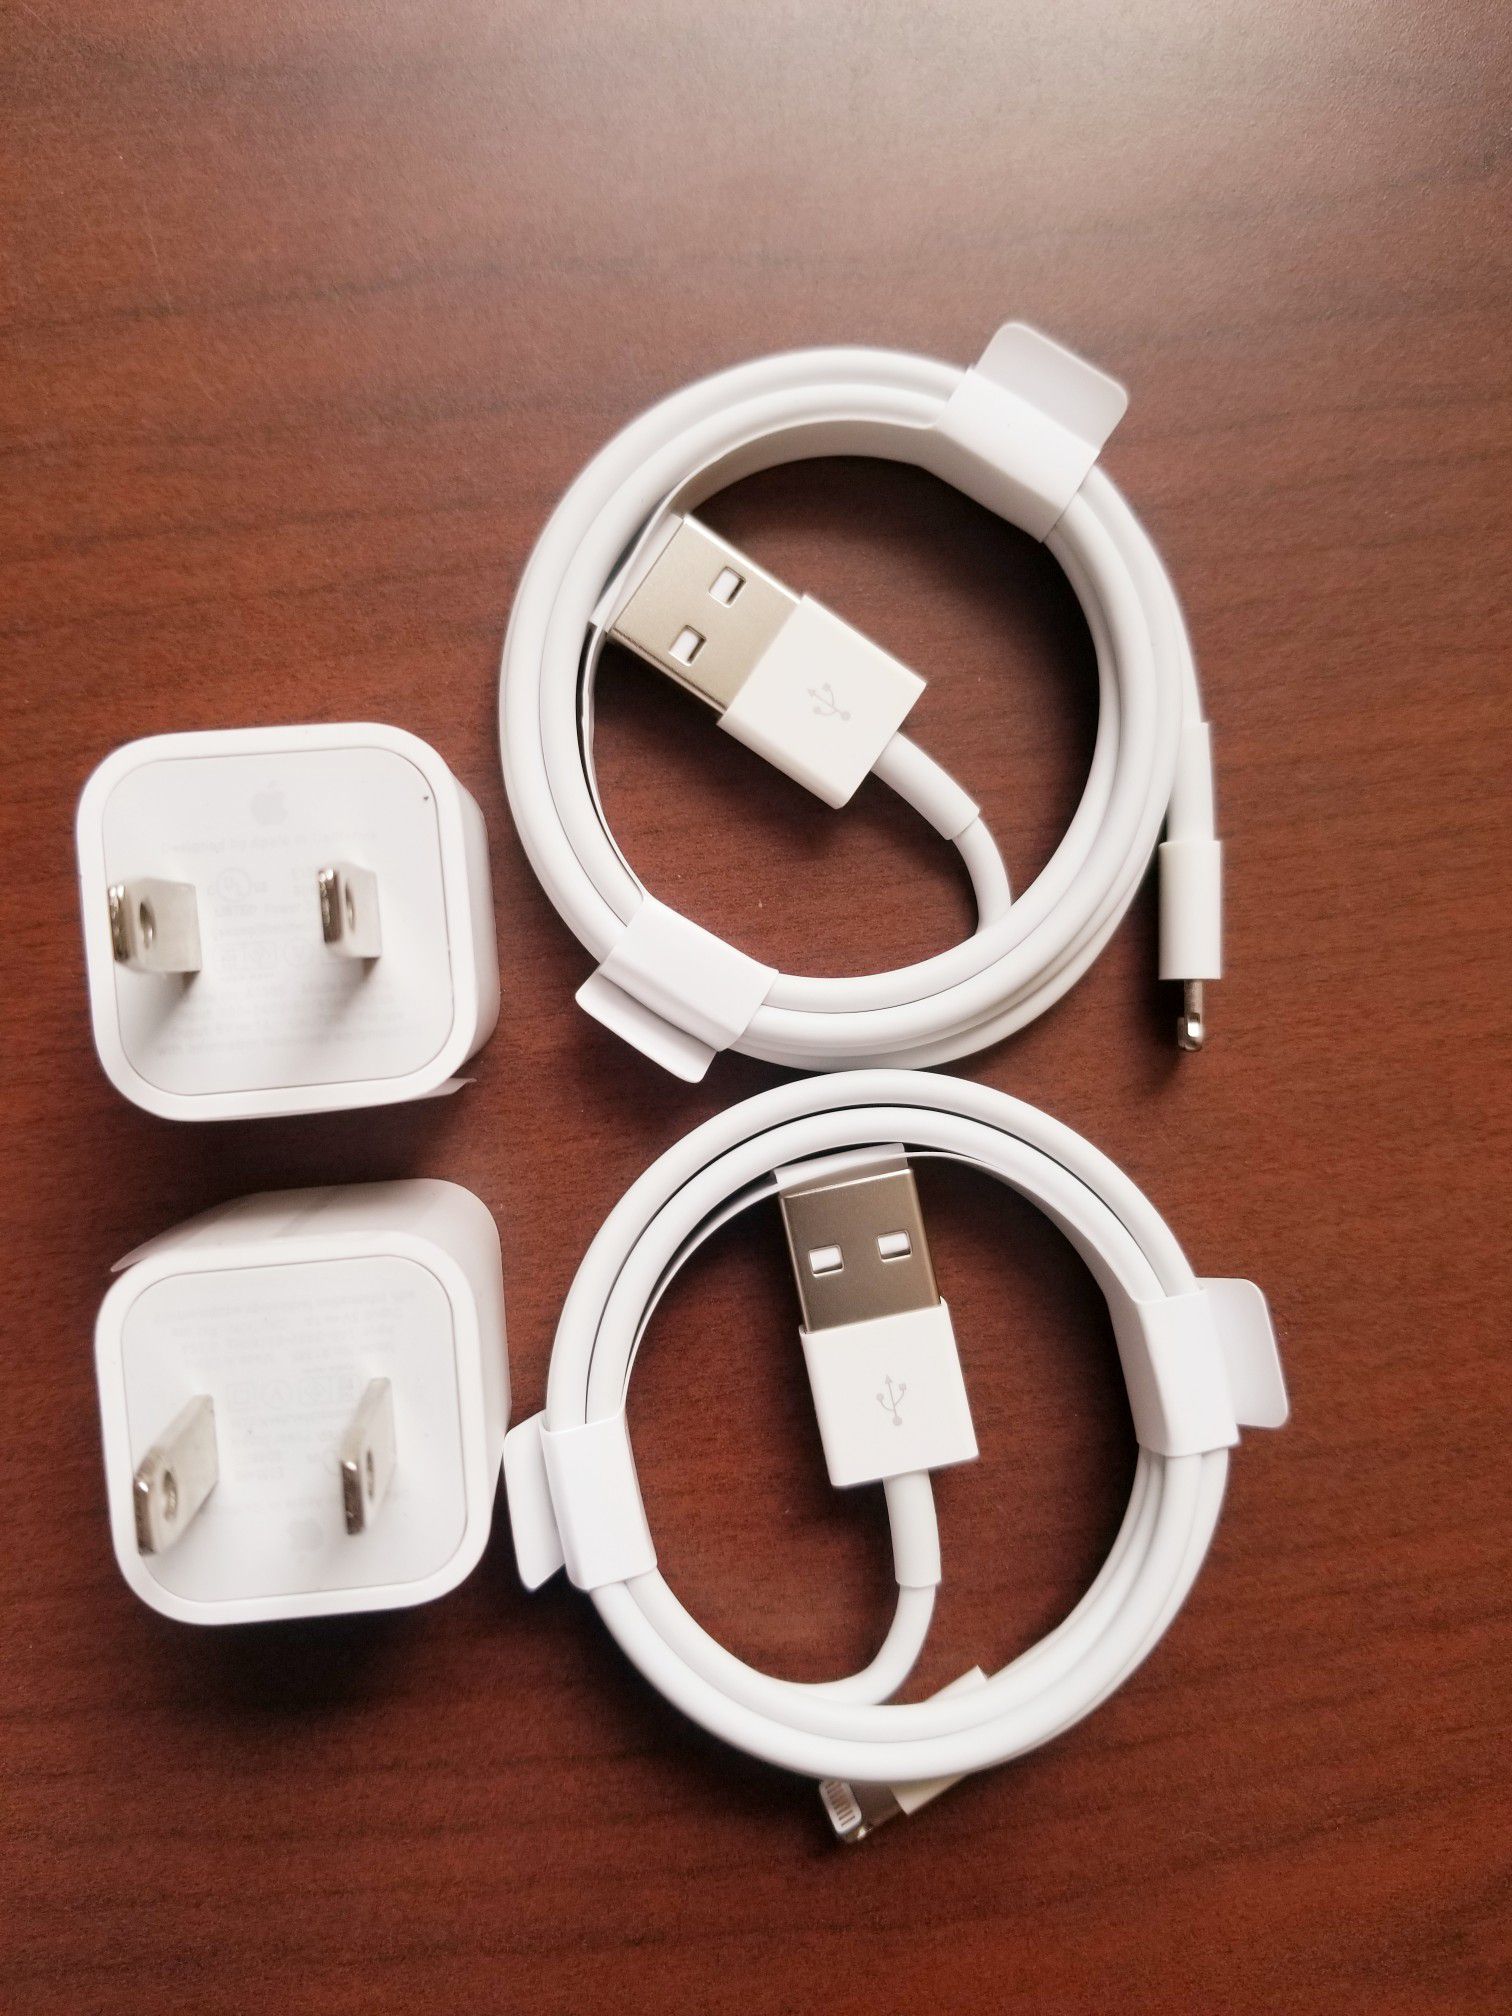 2 brand new original  iphone chargers